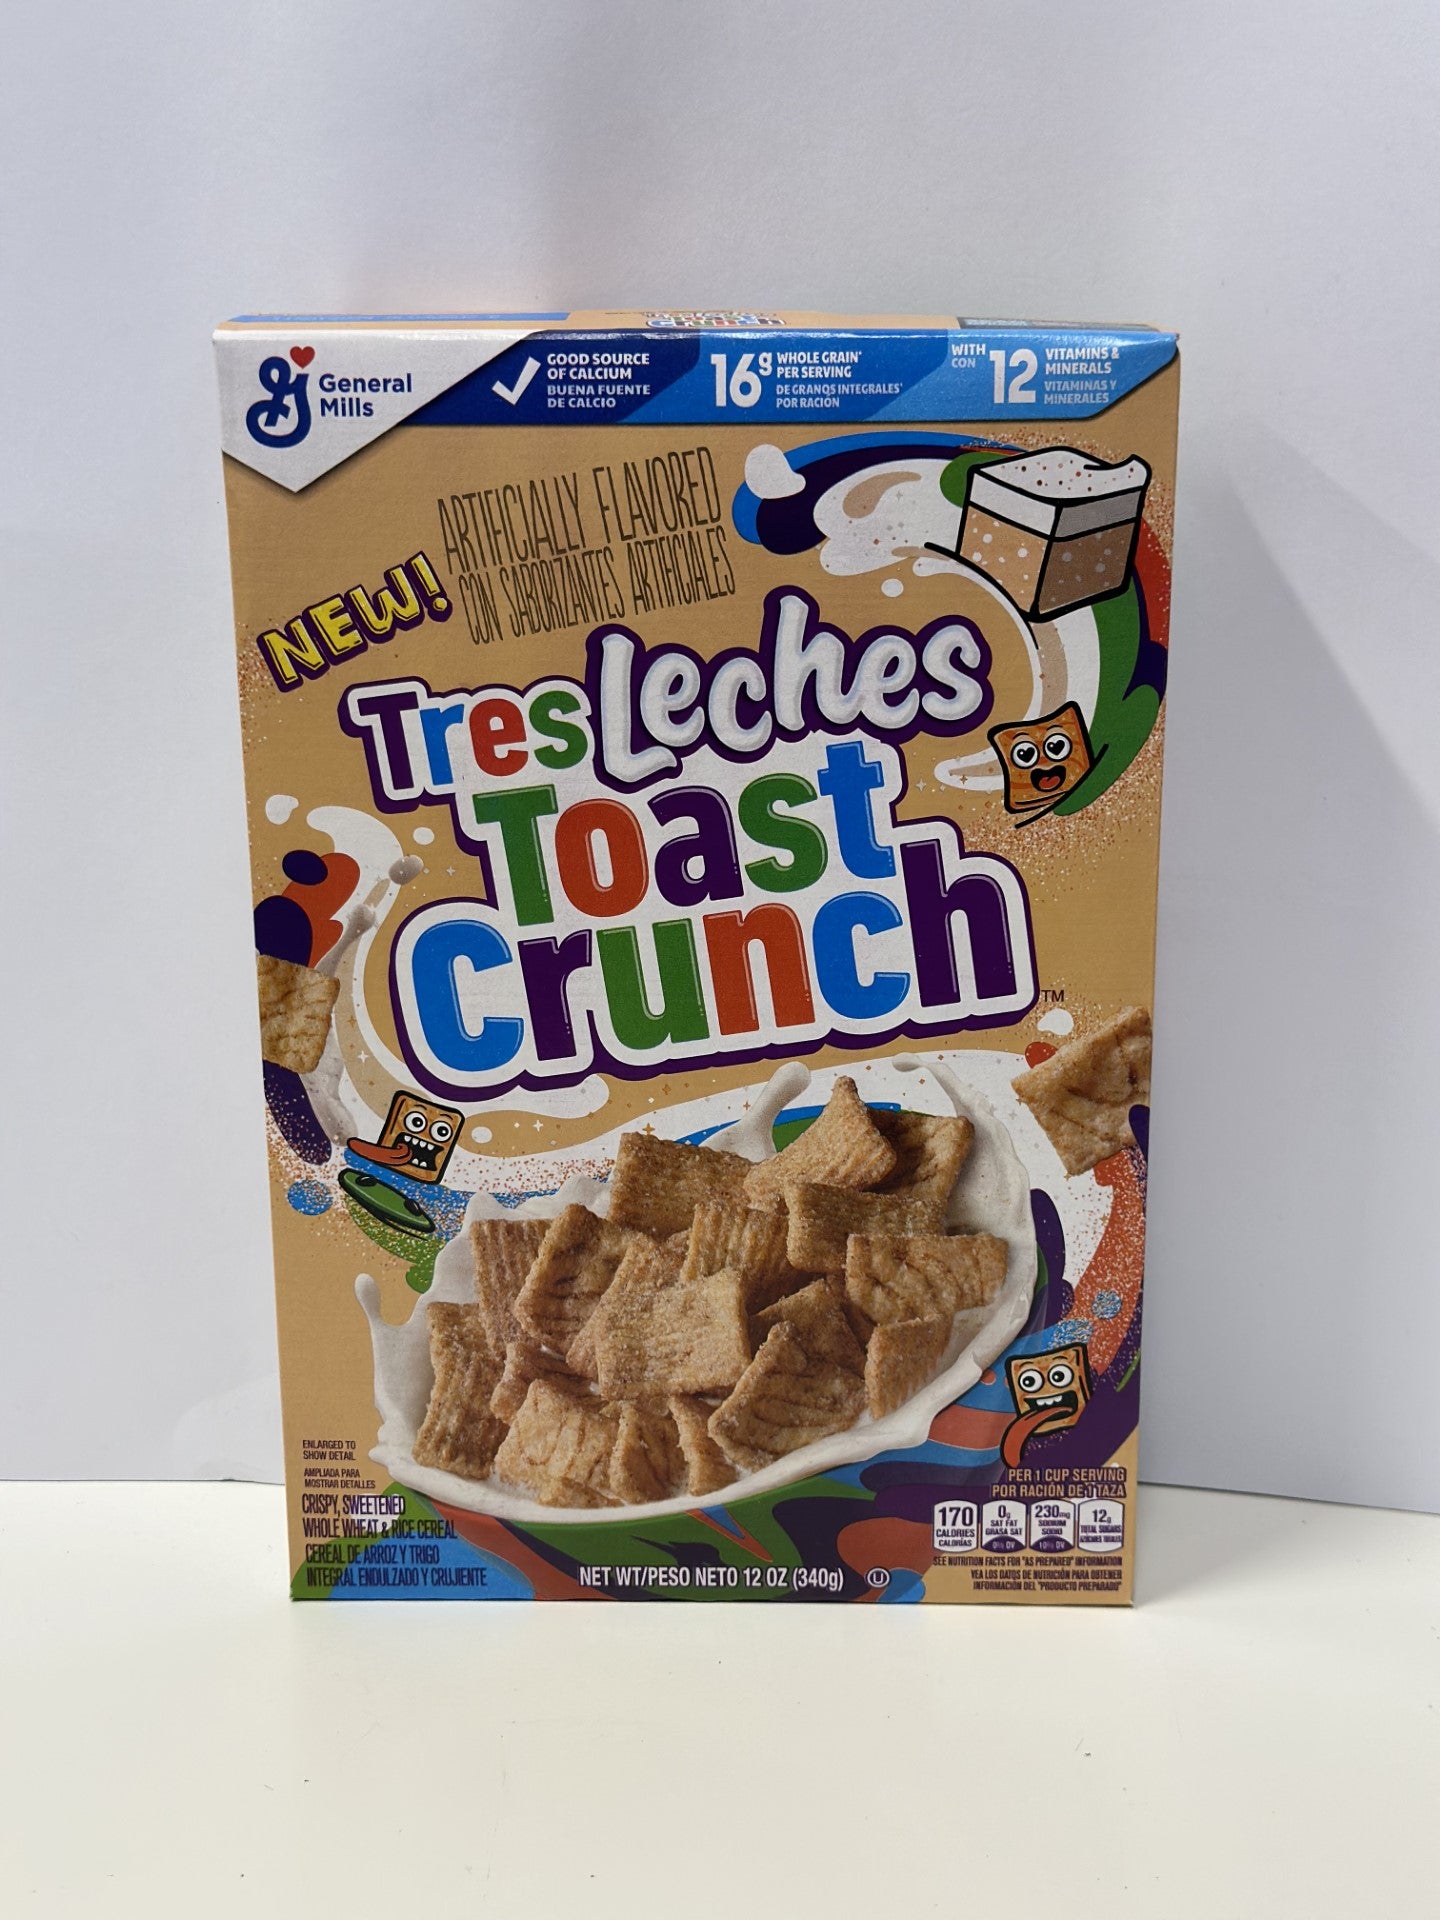 General Mills Tres Leches Toast Crunch Breakfast Cereal 340g BBD: 11/05/24